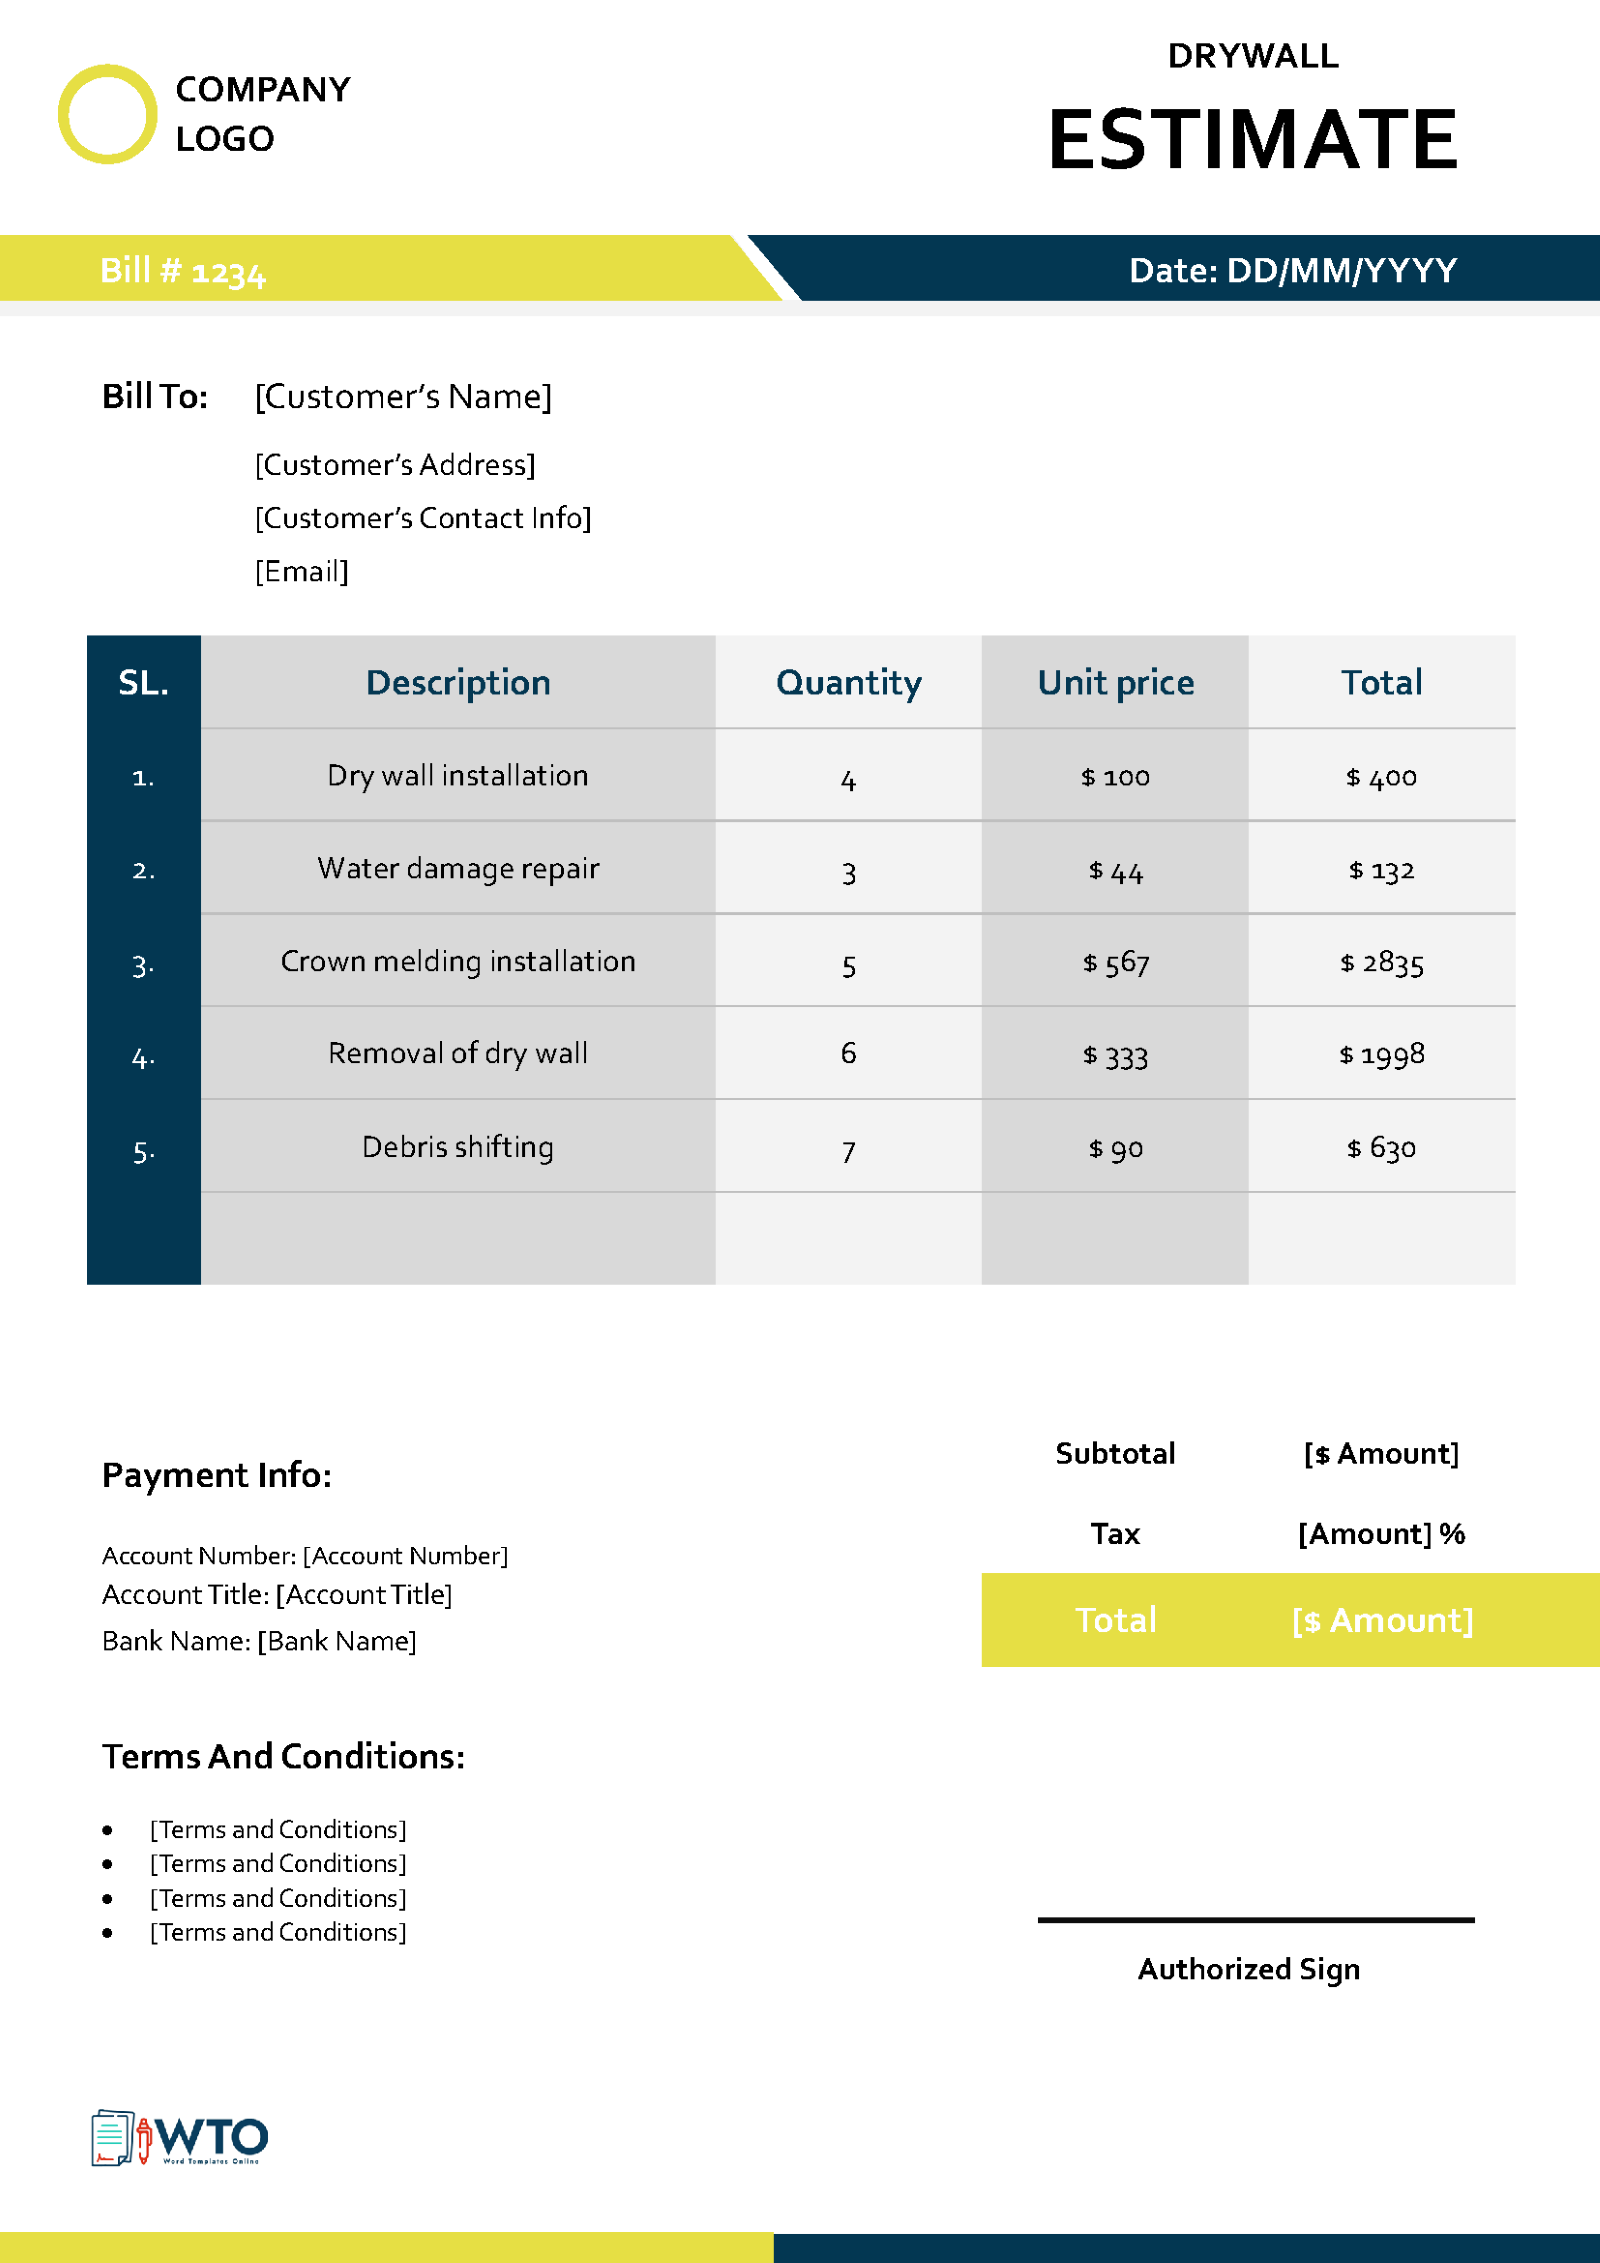 Get Your Dry Wall Estimate Template - Free and Editable